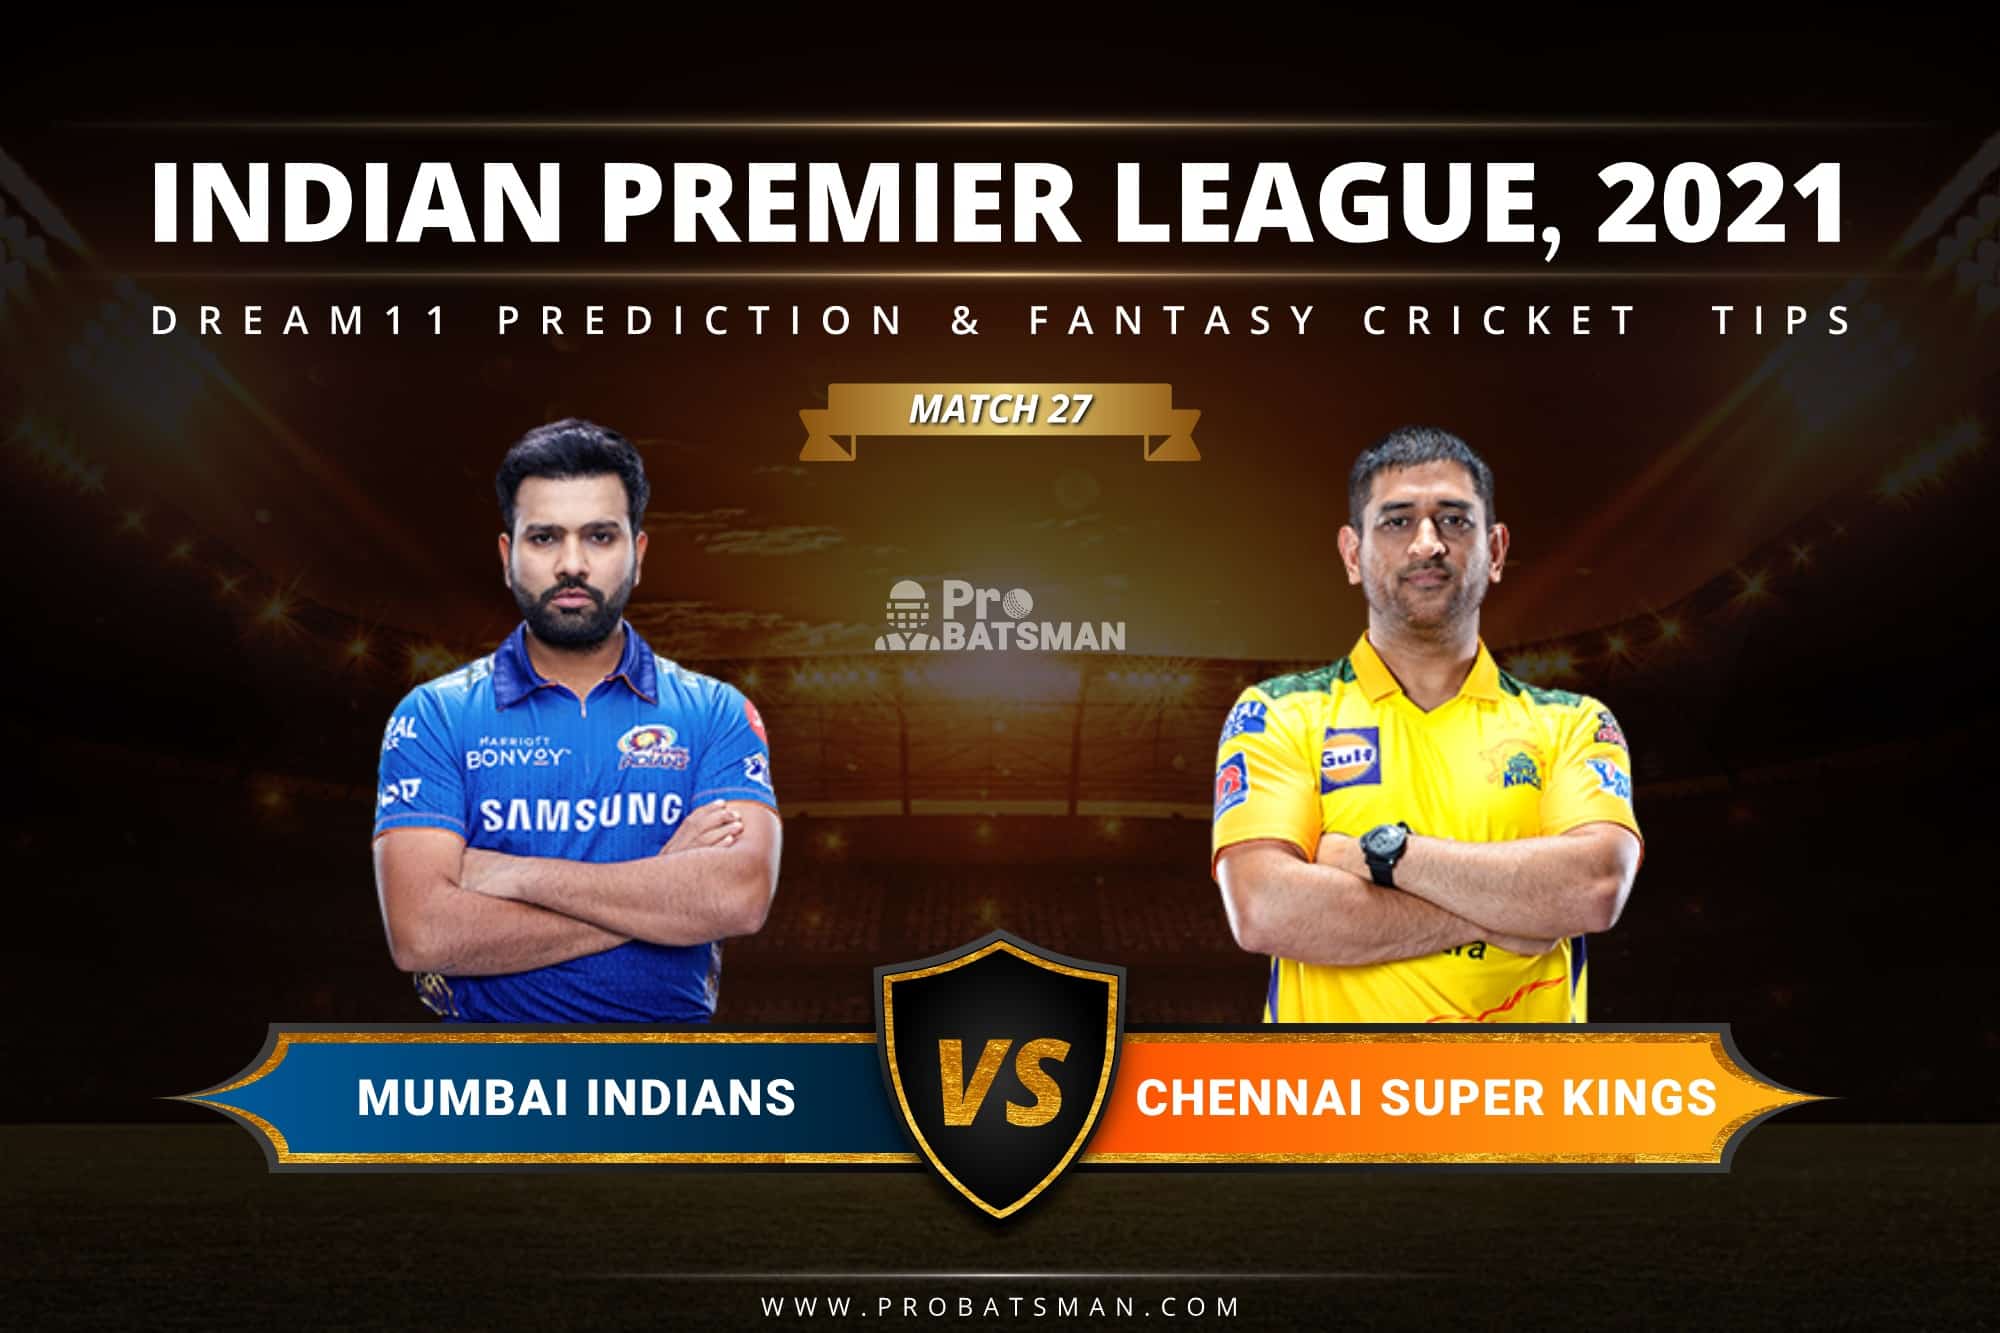 MI vs CSK Dream11 Prediction: Fantasy Cricket Tips, Playing XI, Pitch Report, Stats & Injury Updates of Match 27, IPL 2021